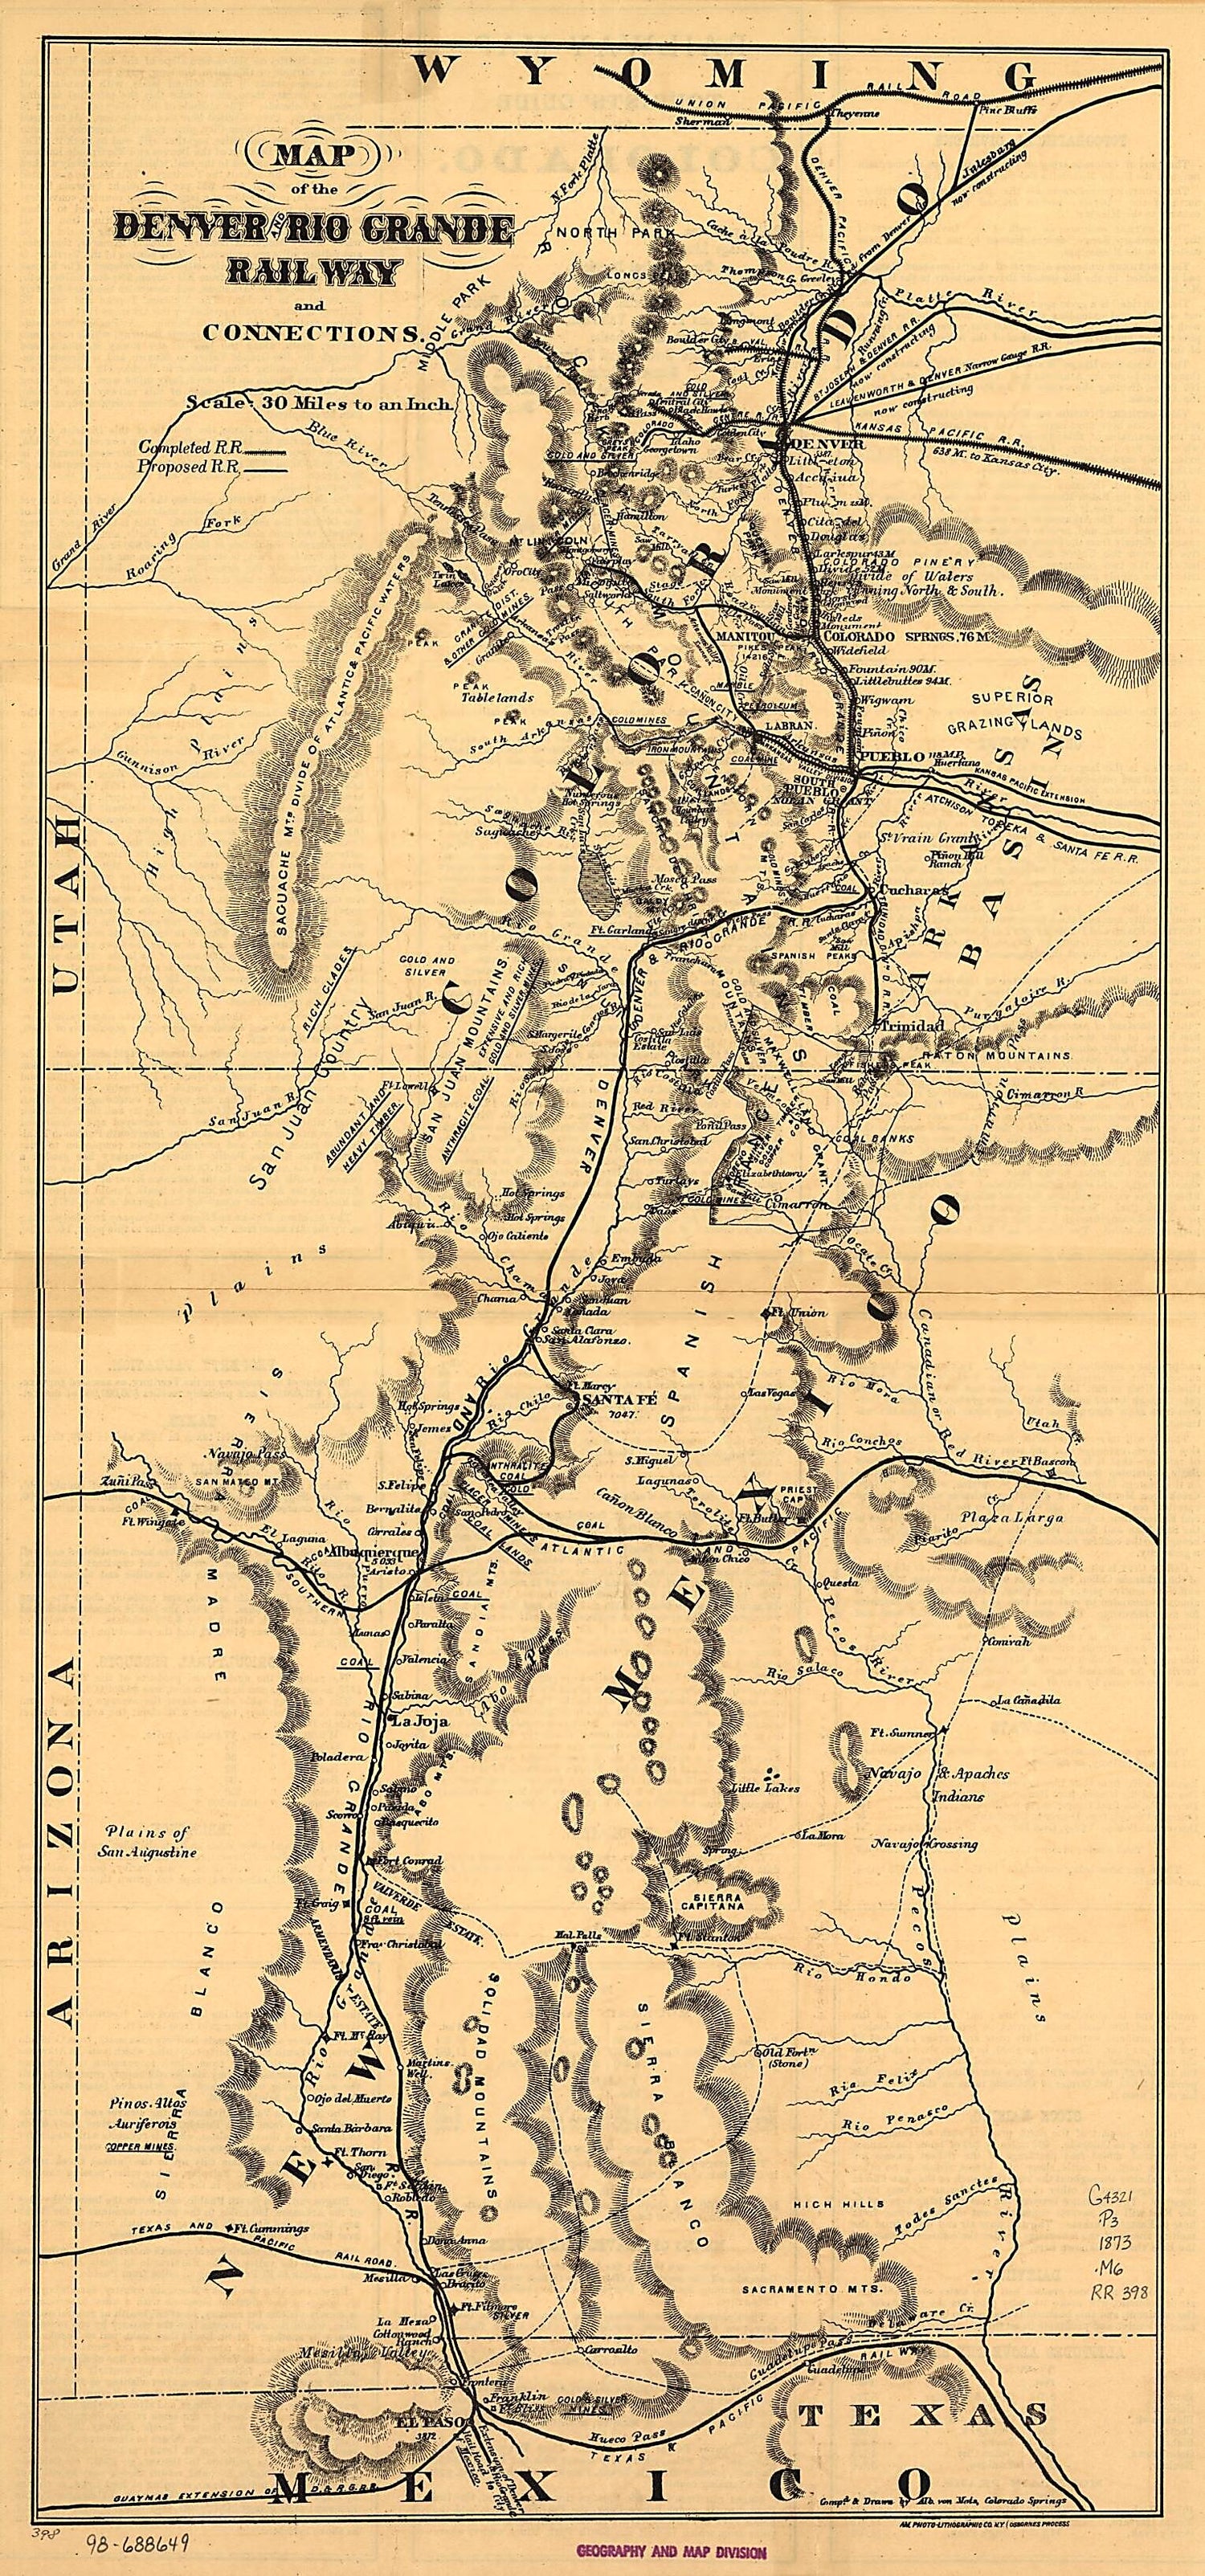 This old map of Map of the Denver and Rio Grande Railway and Connections from 1873 was created by  Denver and Rio Grande Railway Company, Albert Von Motz in 1873